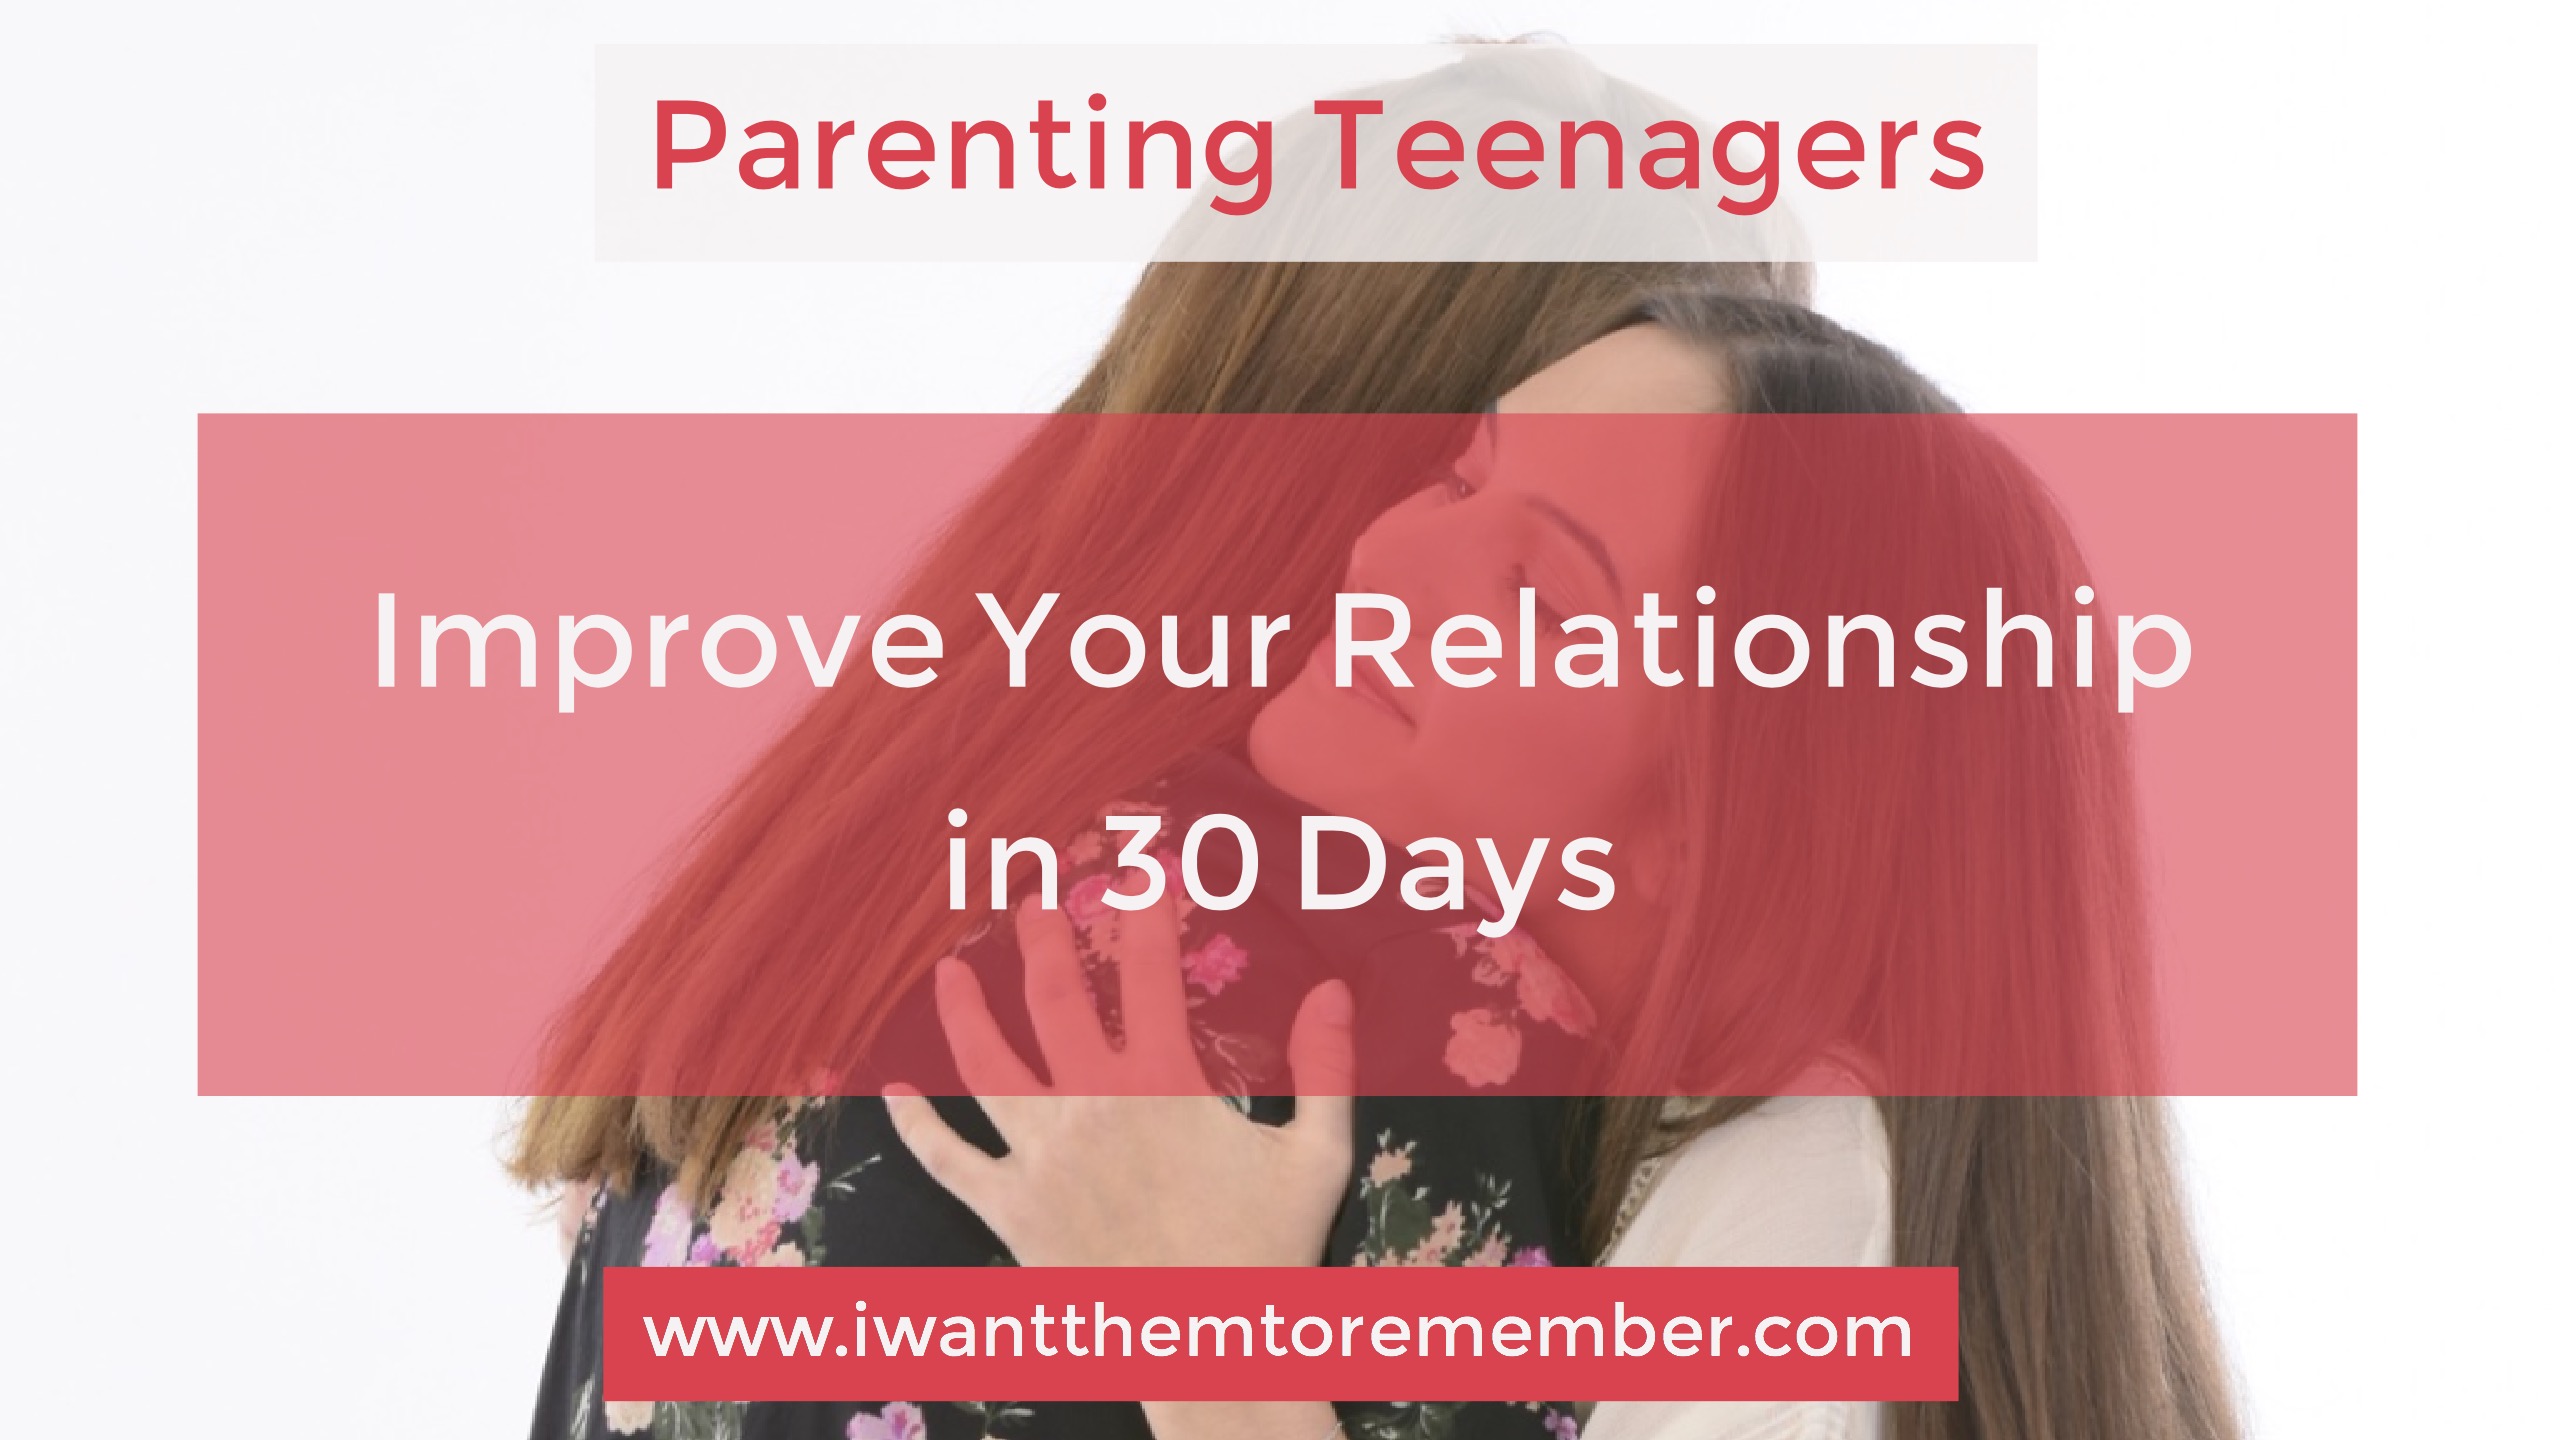 Parenting Teenagers: Improve Your Relationship in 30 Days